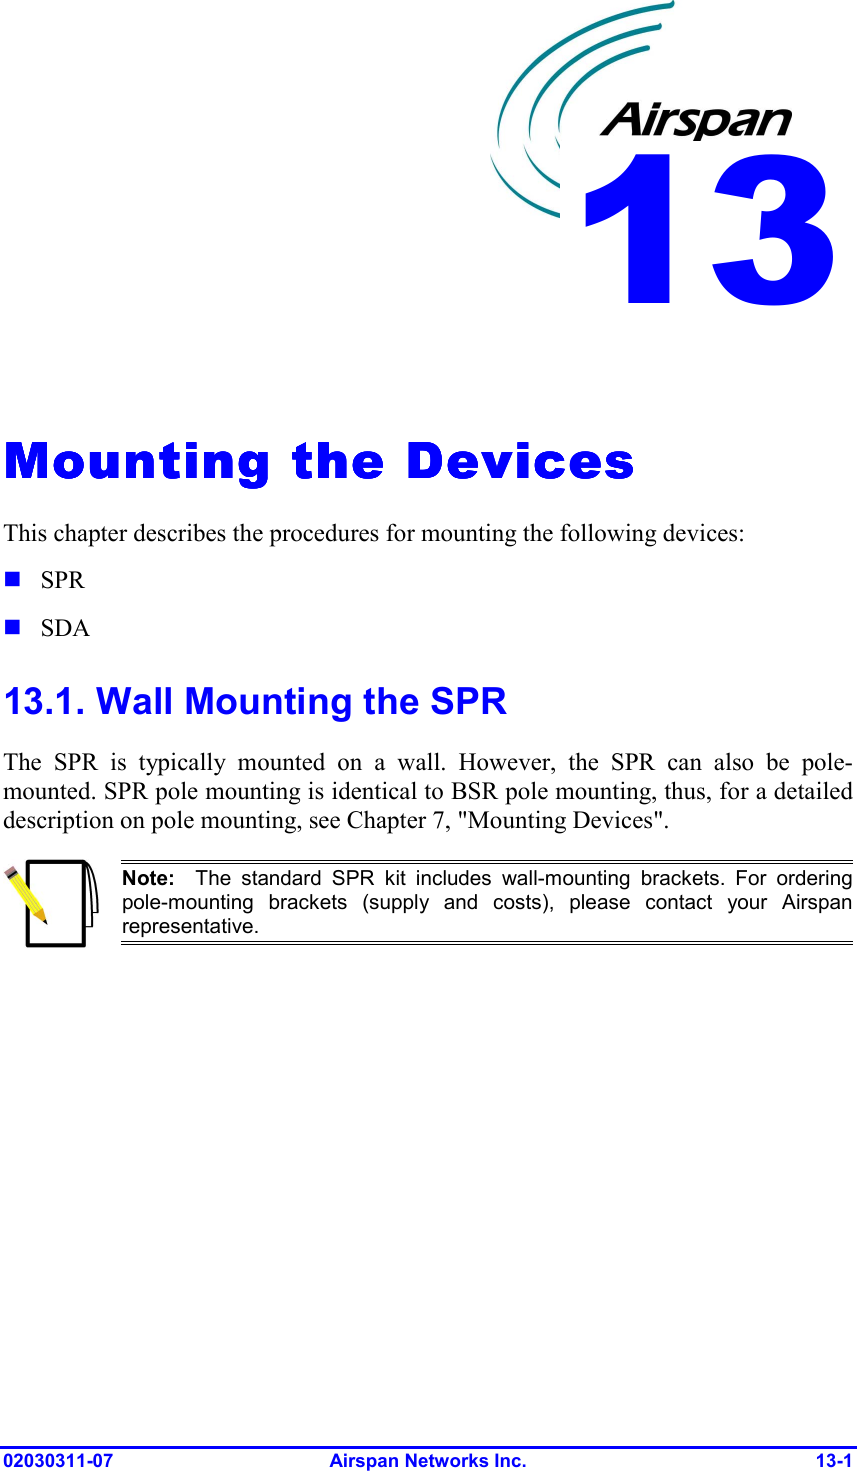  02030311-07 Airspan Networks Inc.  13-1   Mounting the DevicesMounting the DevicesMounting the DevicesMounting the Devices    This chapter describes the procedures for mounting the following devices: ! SPR ! SDA 13.1. Wall Mounting the SPR The SPR is typically mounted on a wall. However, the SPR can also be pole-mounted. SPR pole mounting is identical to BSR pole mounting, thus, for a detailed description on pole mounting, see Chapter 7, &quot;Mounting Devices&quot;.   Note:  The standard SPR kit includes wall-mounting brackets. For ordering pole-mounting brackets (supply and costs), please contact your Airspanrepresentative.  13